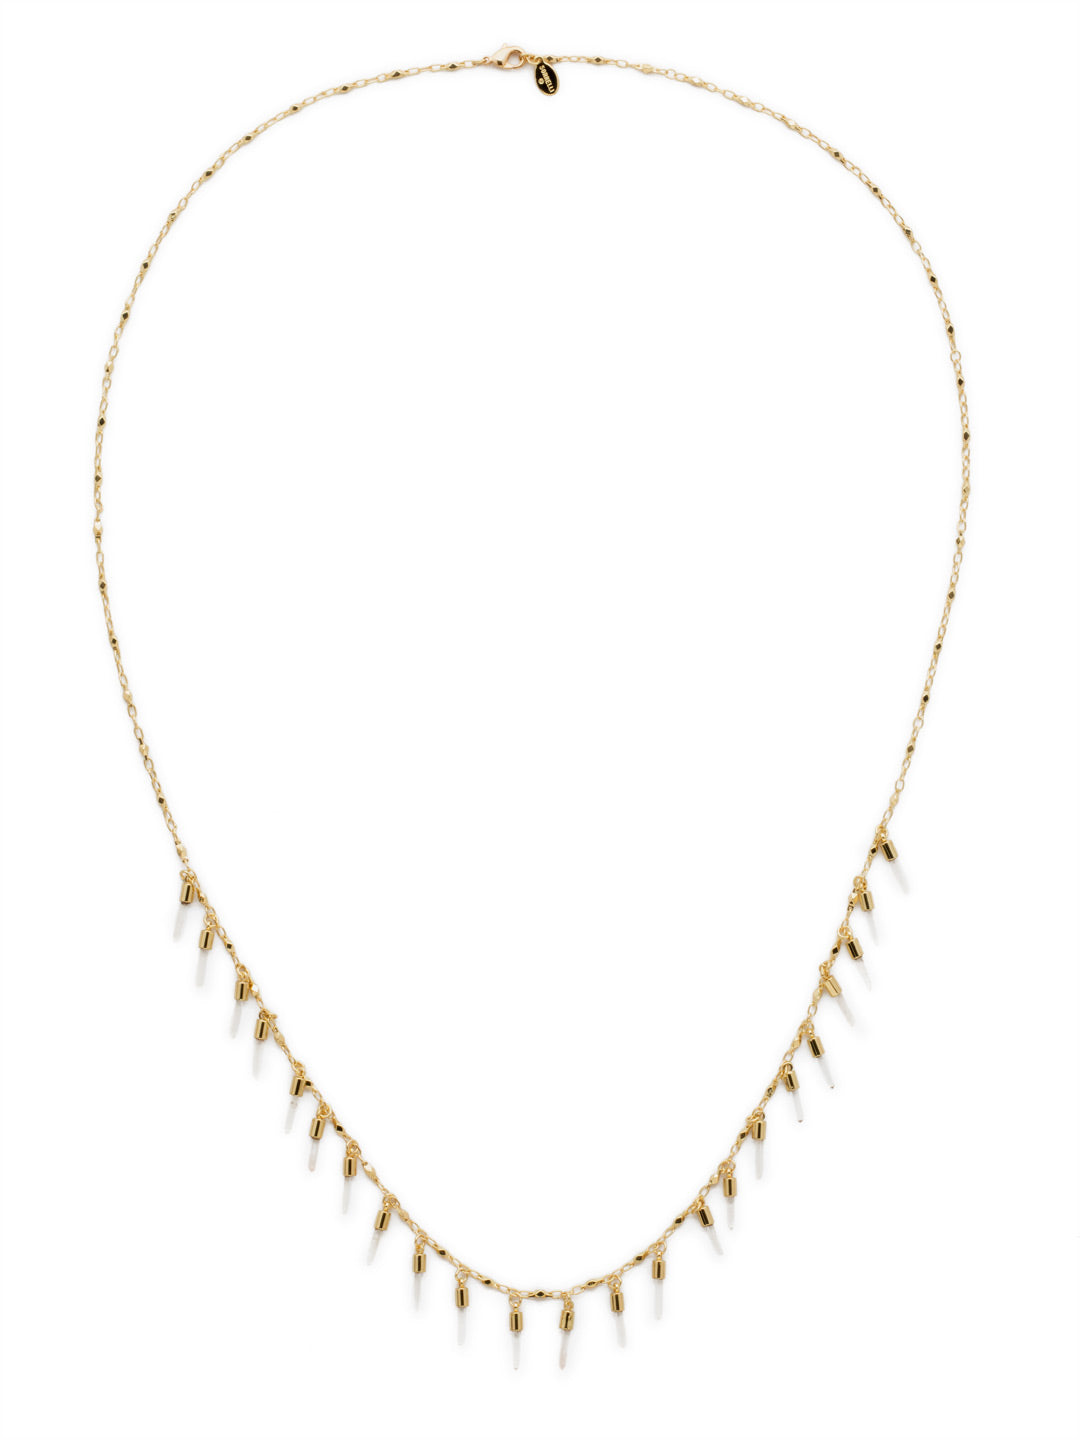 Dangling Medallions Necklace Tennis Necklace - NDW26BGCRY - <p>A series of medallions hang from this chain making it the ideal accessory to be layered or worn alone. From Sorrelli's Crystal collection in our Bright Gold-tone finish.</p>